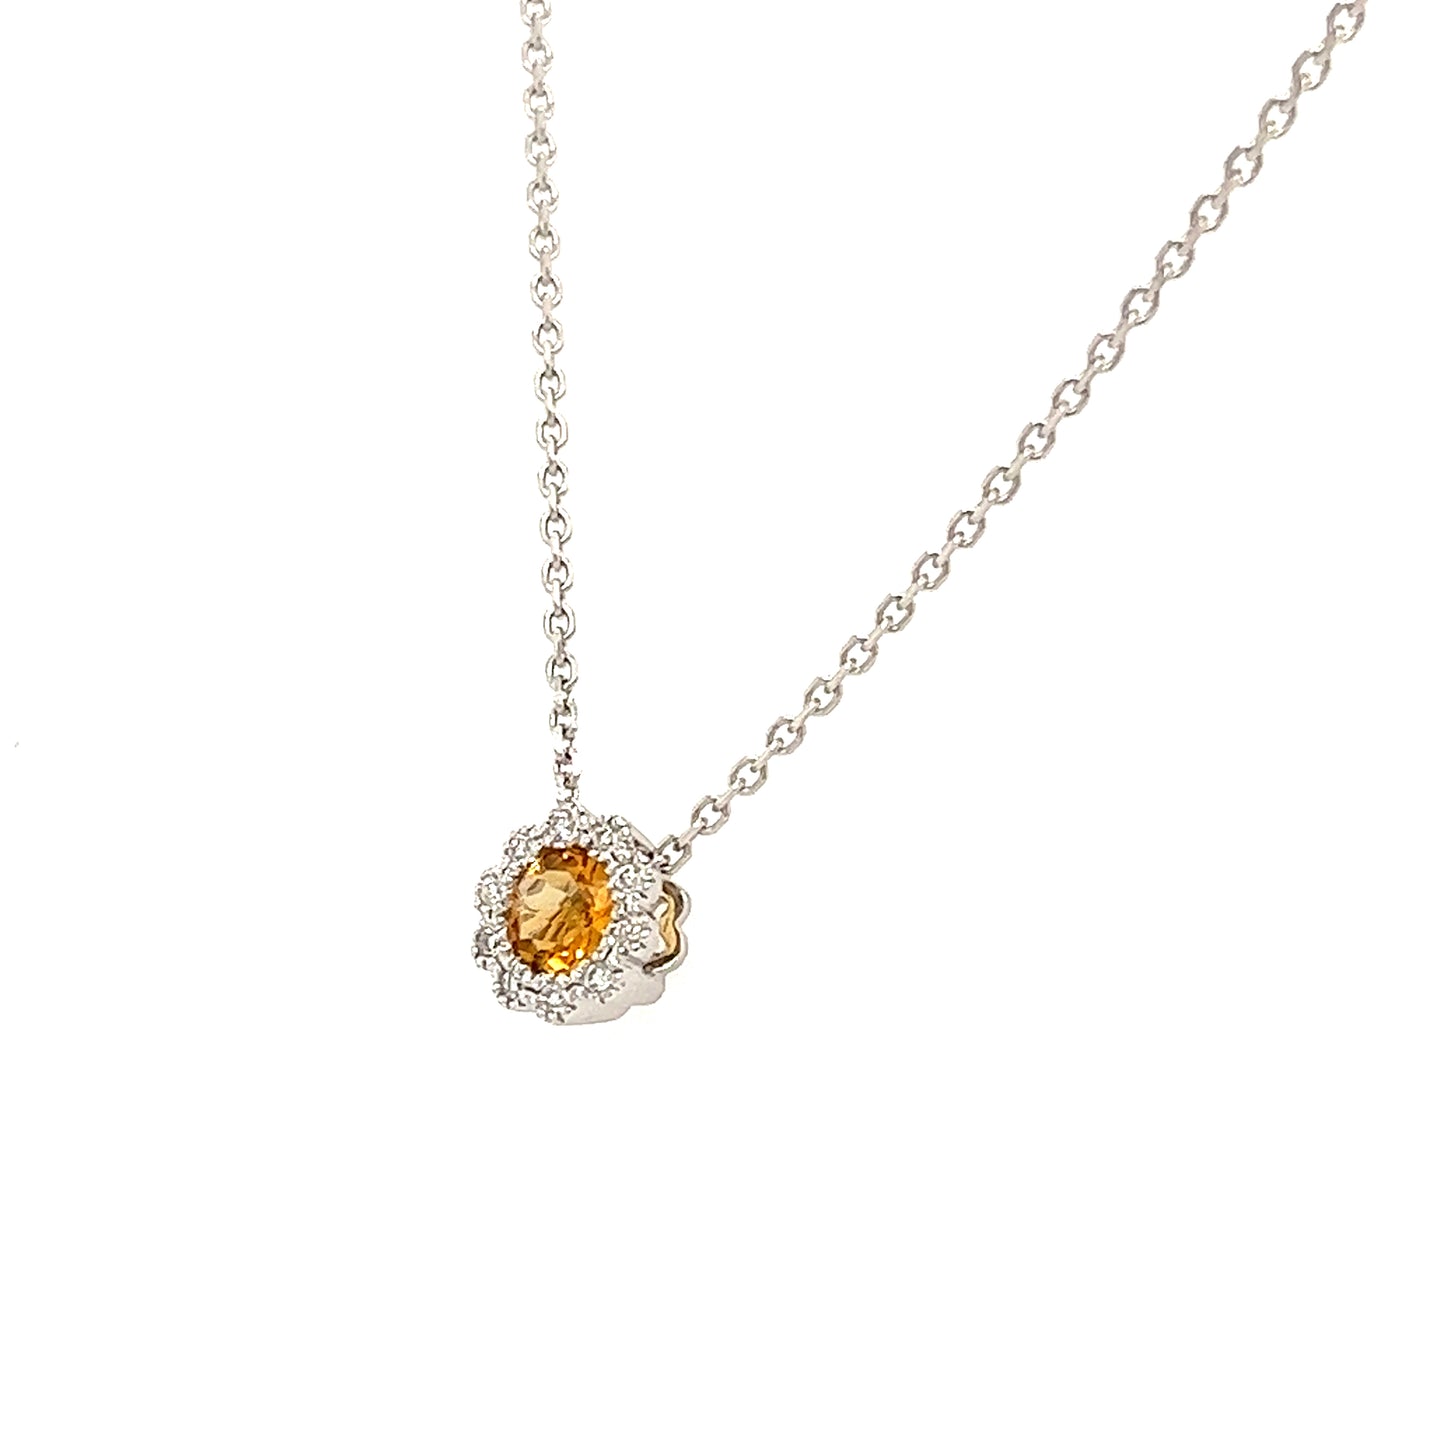 Floral Citrine Pendant with Diamond Halo in 14K White Gold Left Side View Pendant and Chain